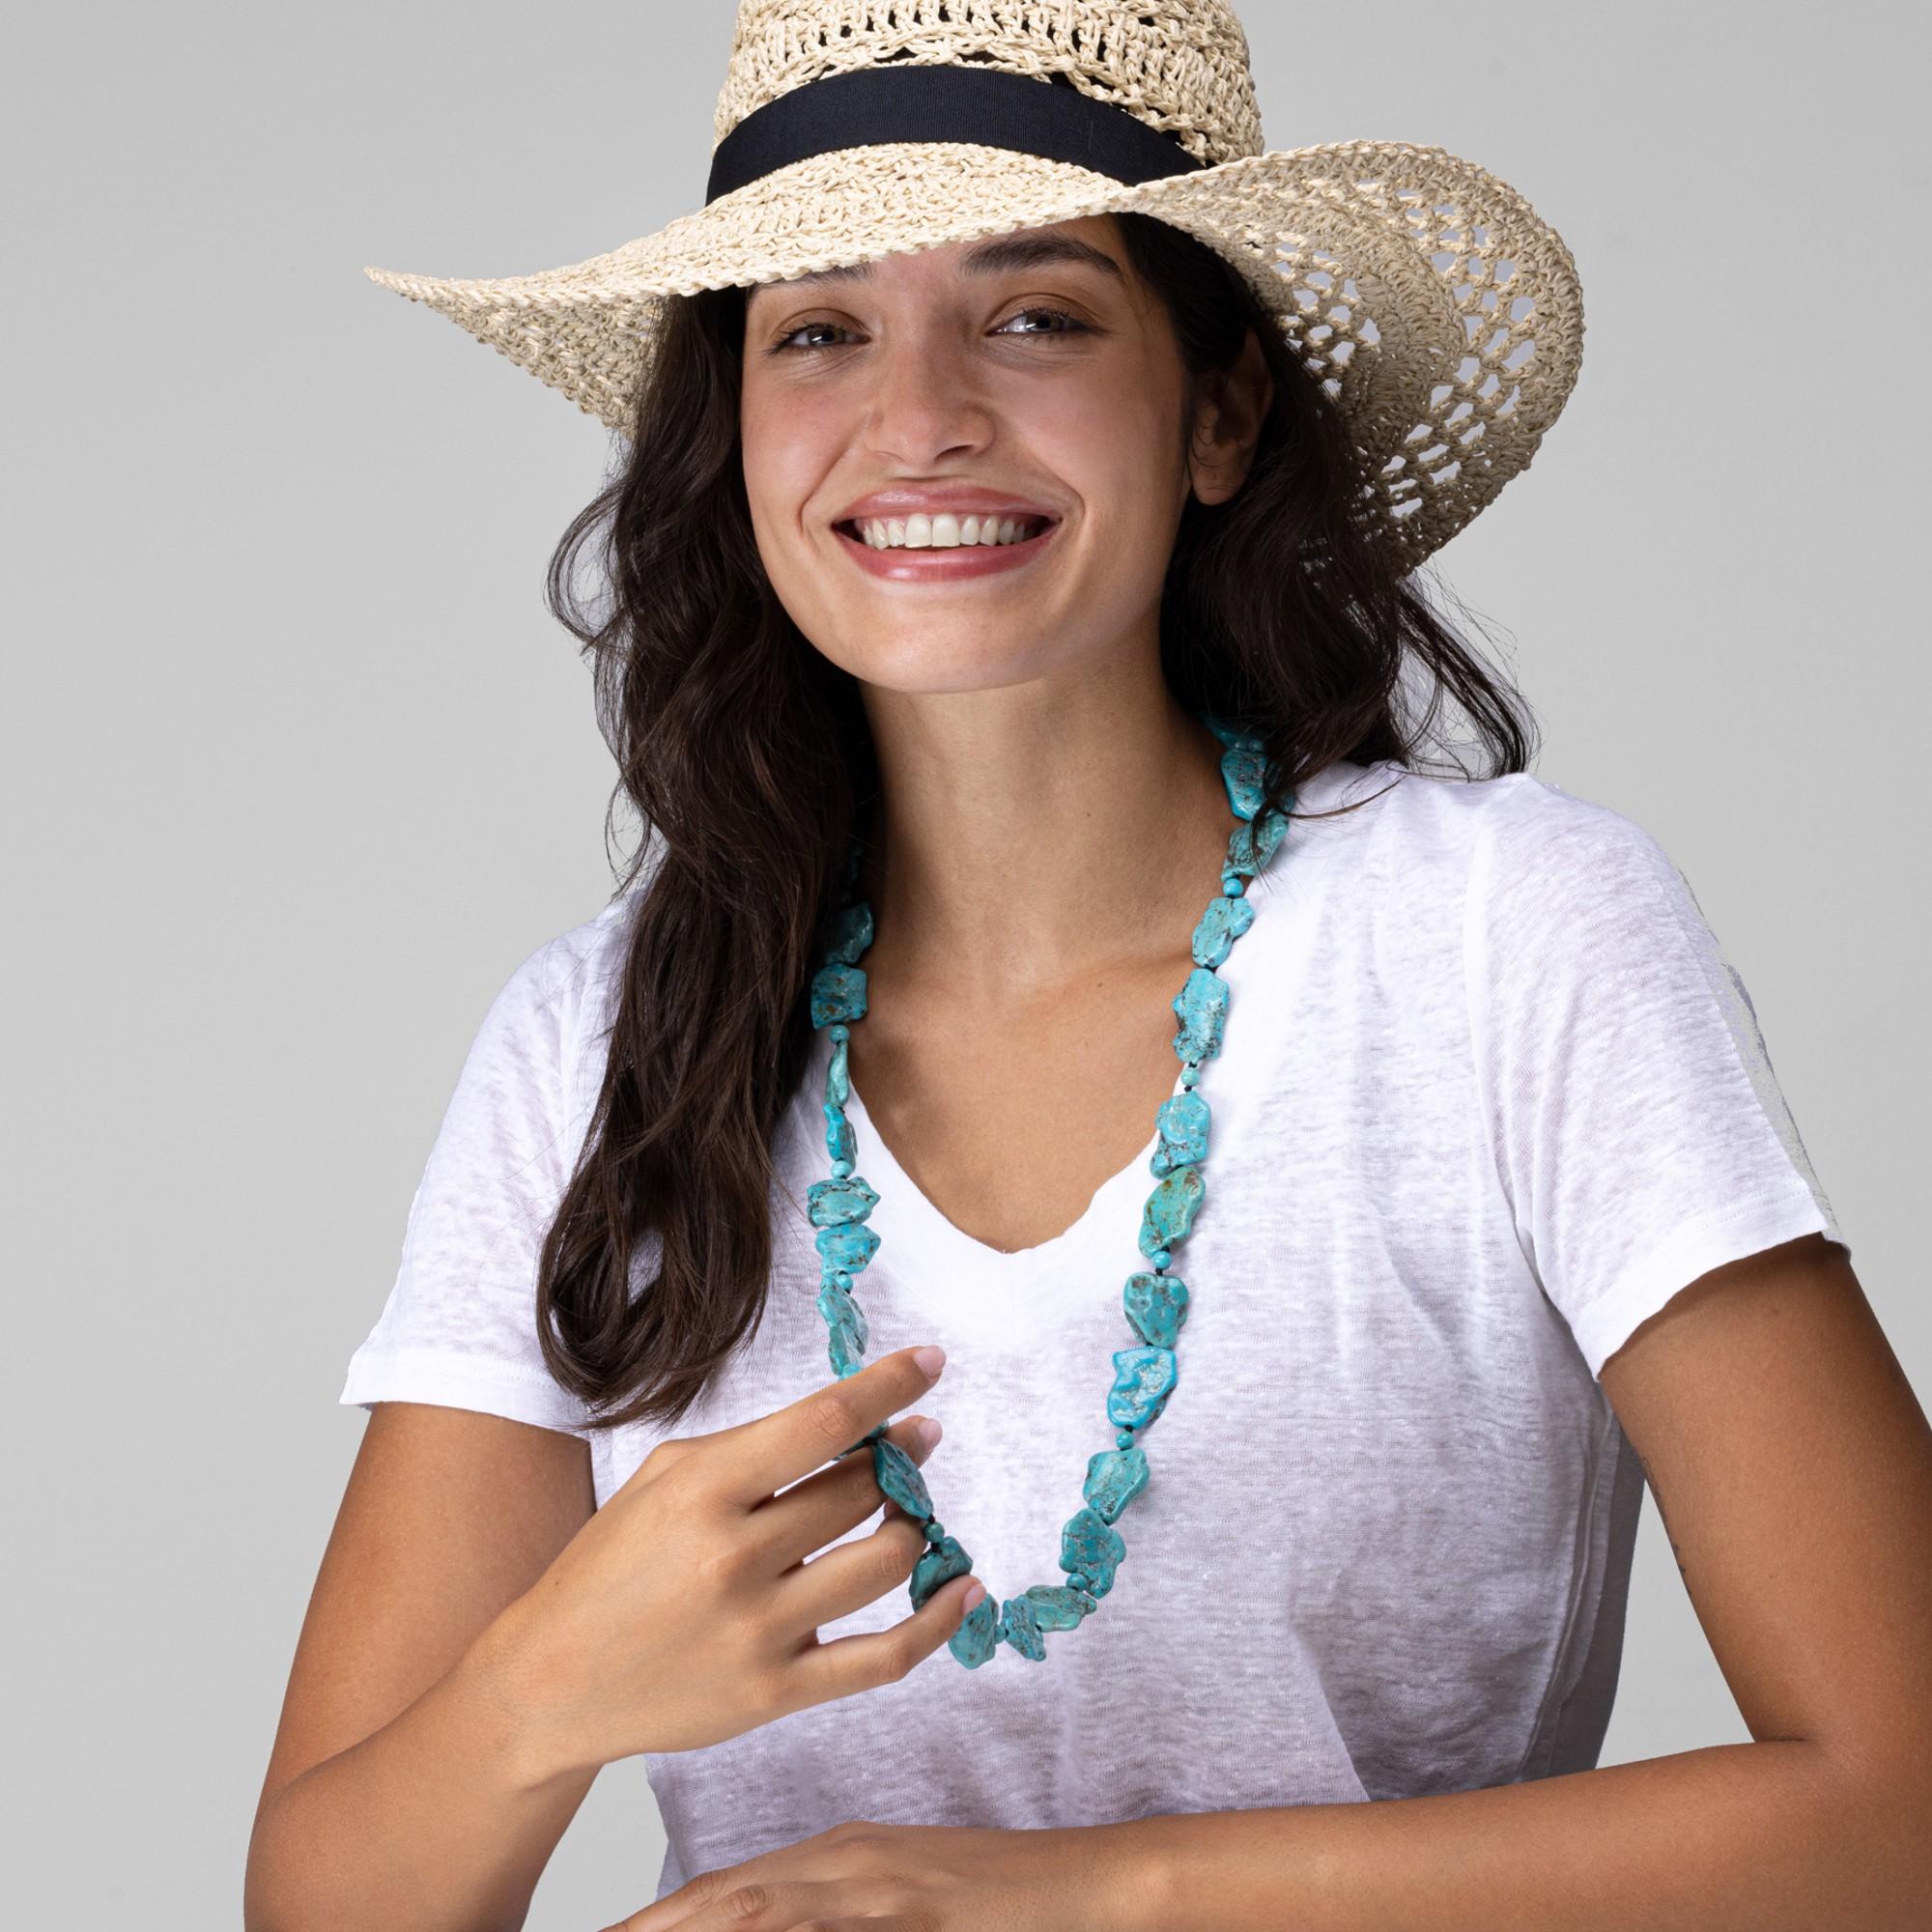 Alex Jona design collection, necklace with flat turquoise pebbles.
Alex Jona jewels stand out, not only for their special design and for the excellent quality of the gemstones, but also for the careful attention given to details during all the